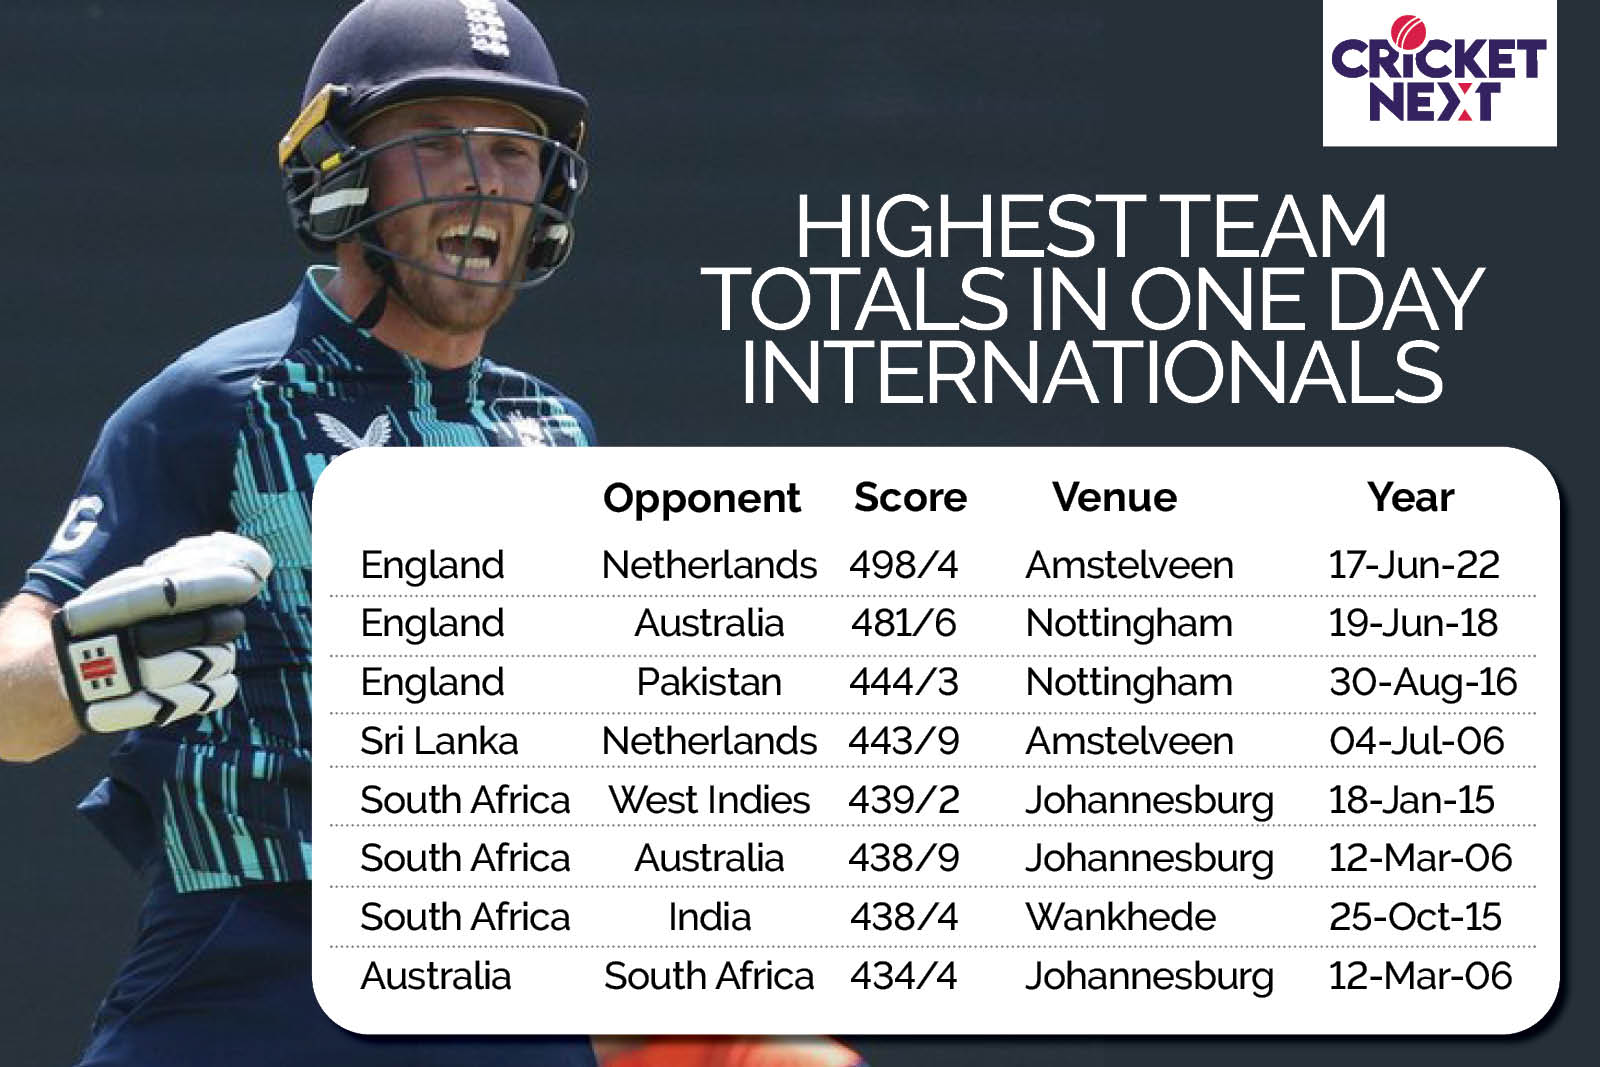 List of highest team totals in ODIs